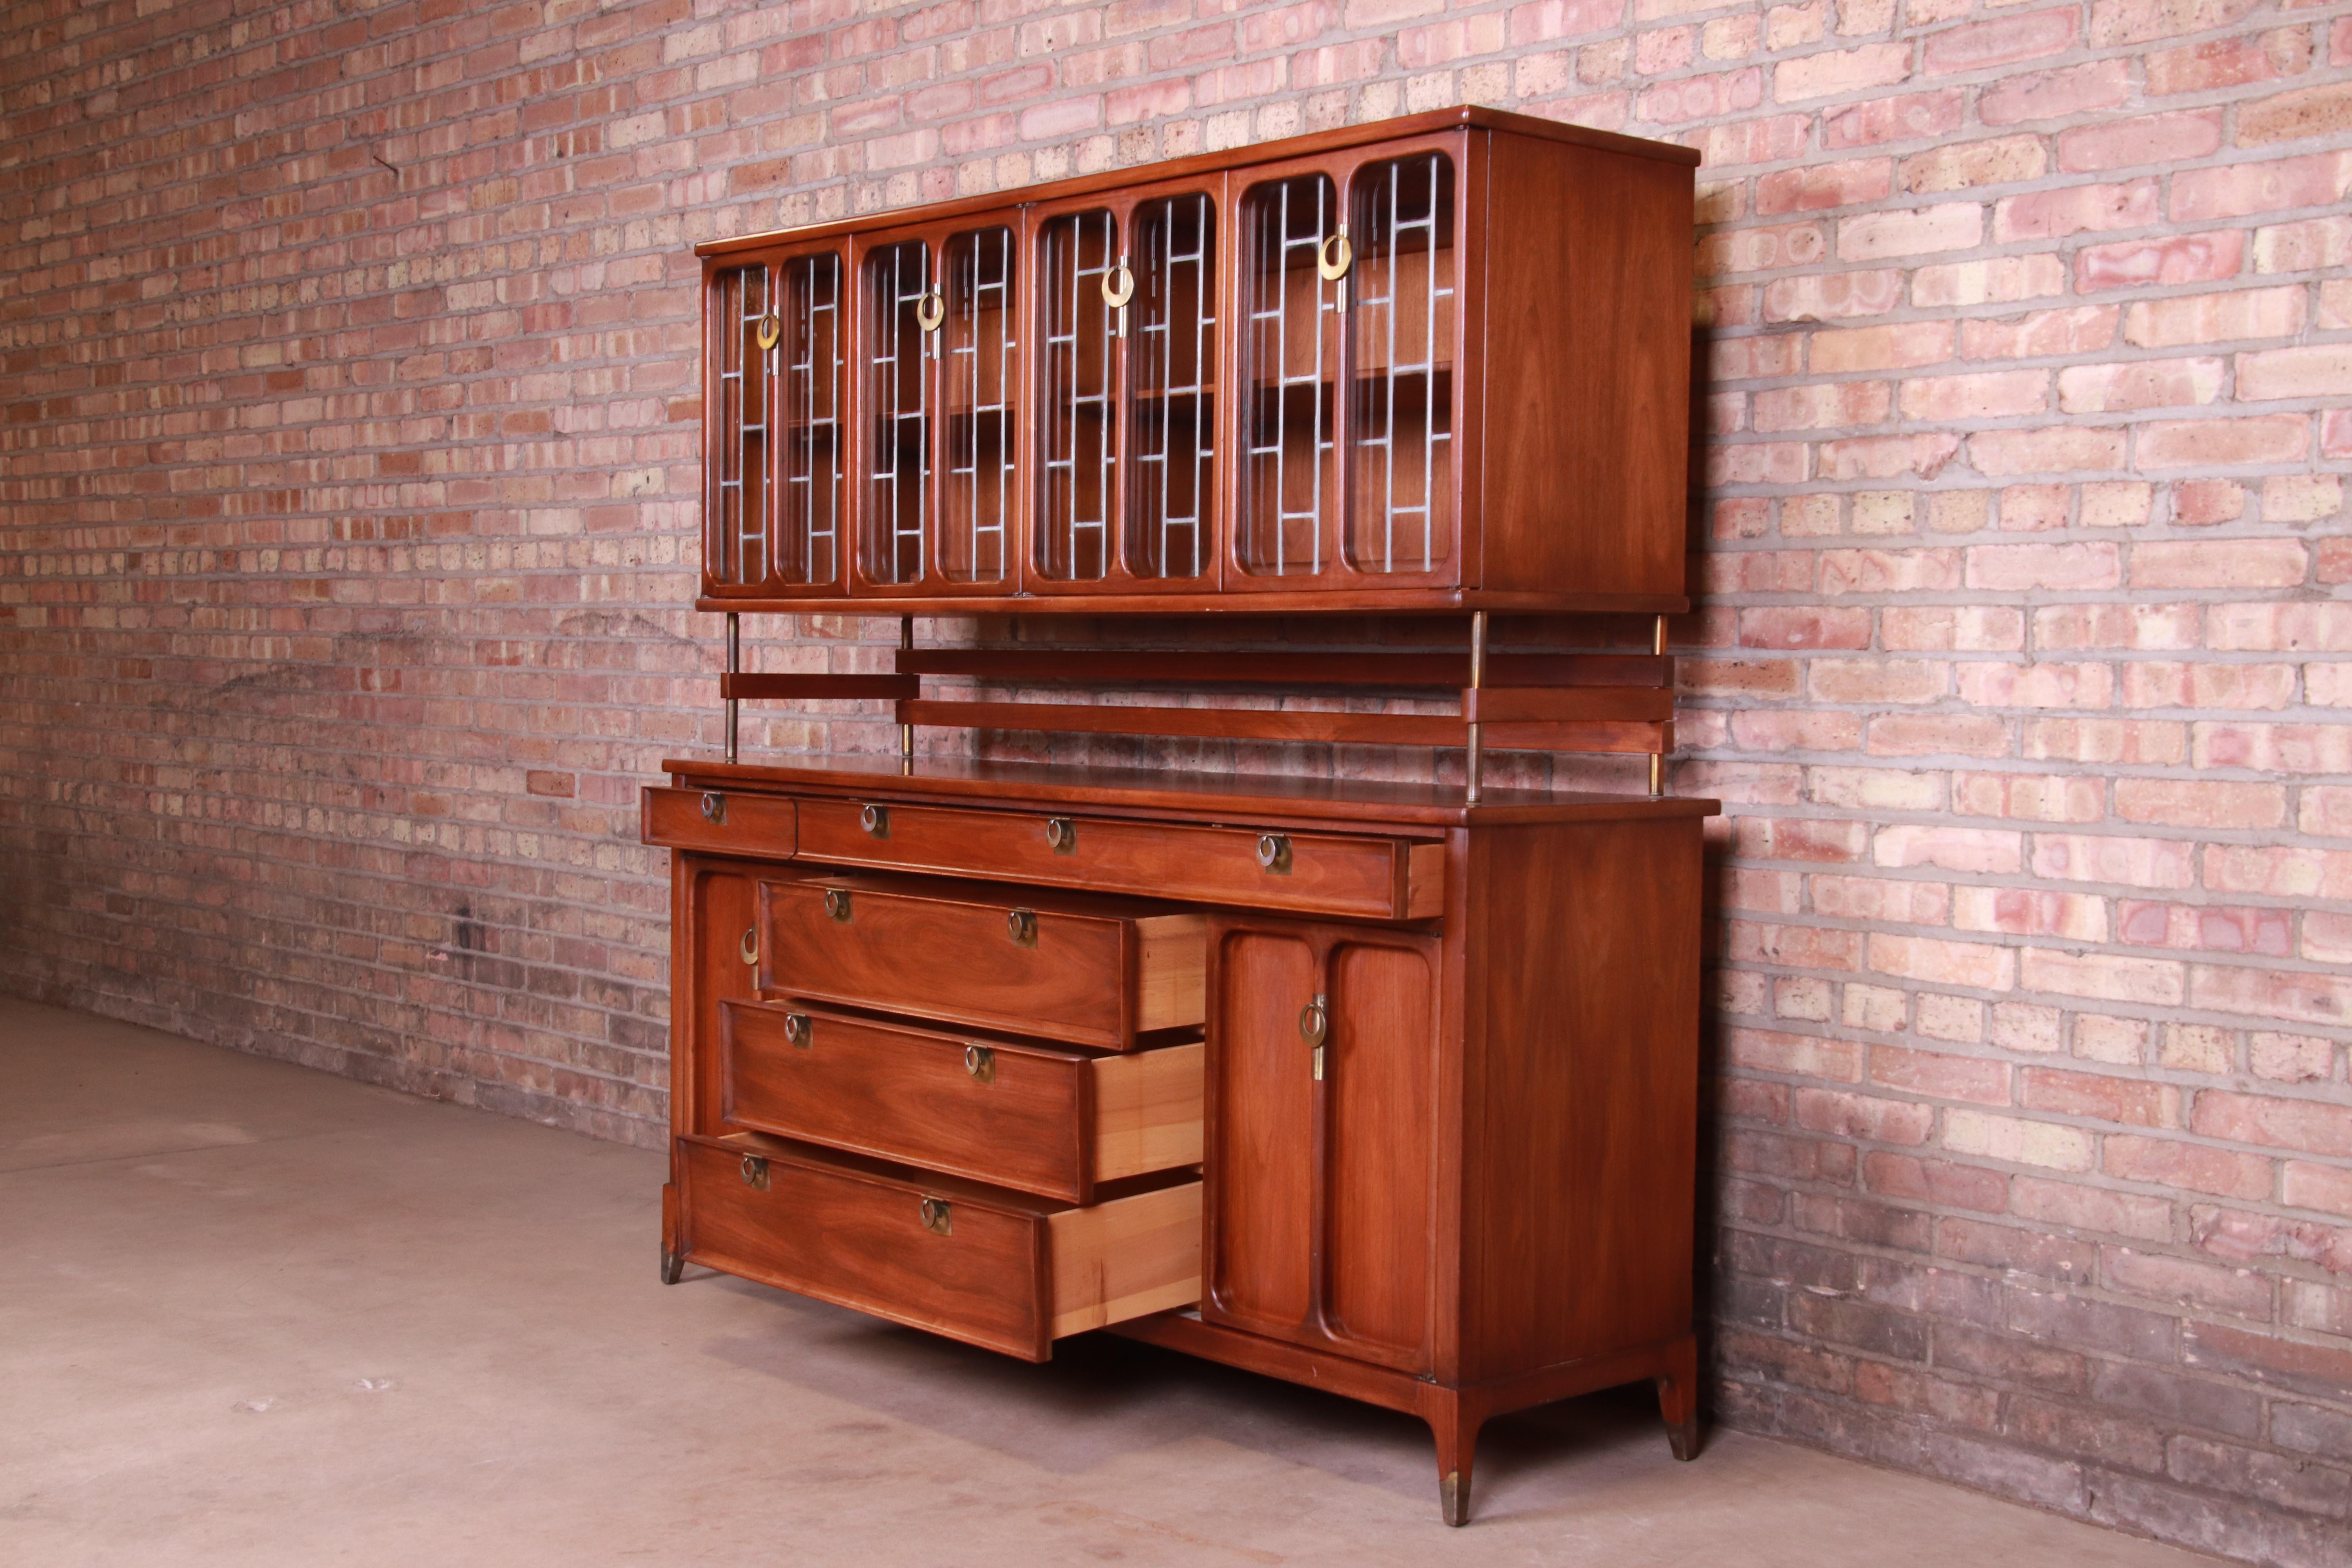 Mid-20th Century Mid-Century Modern Walnut Sideboard with Leaded Glass Hutch by White Furniture